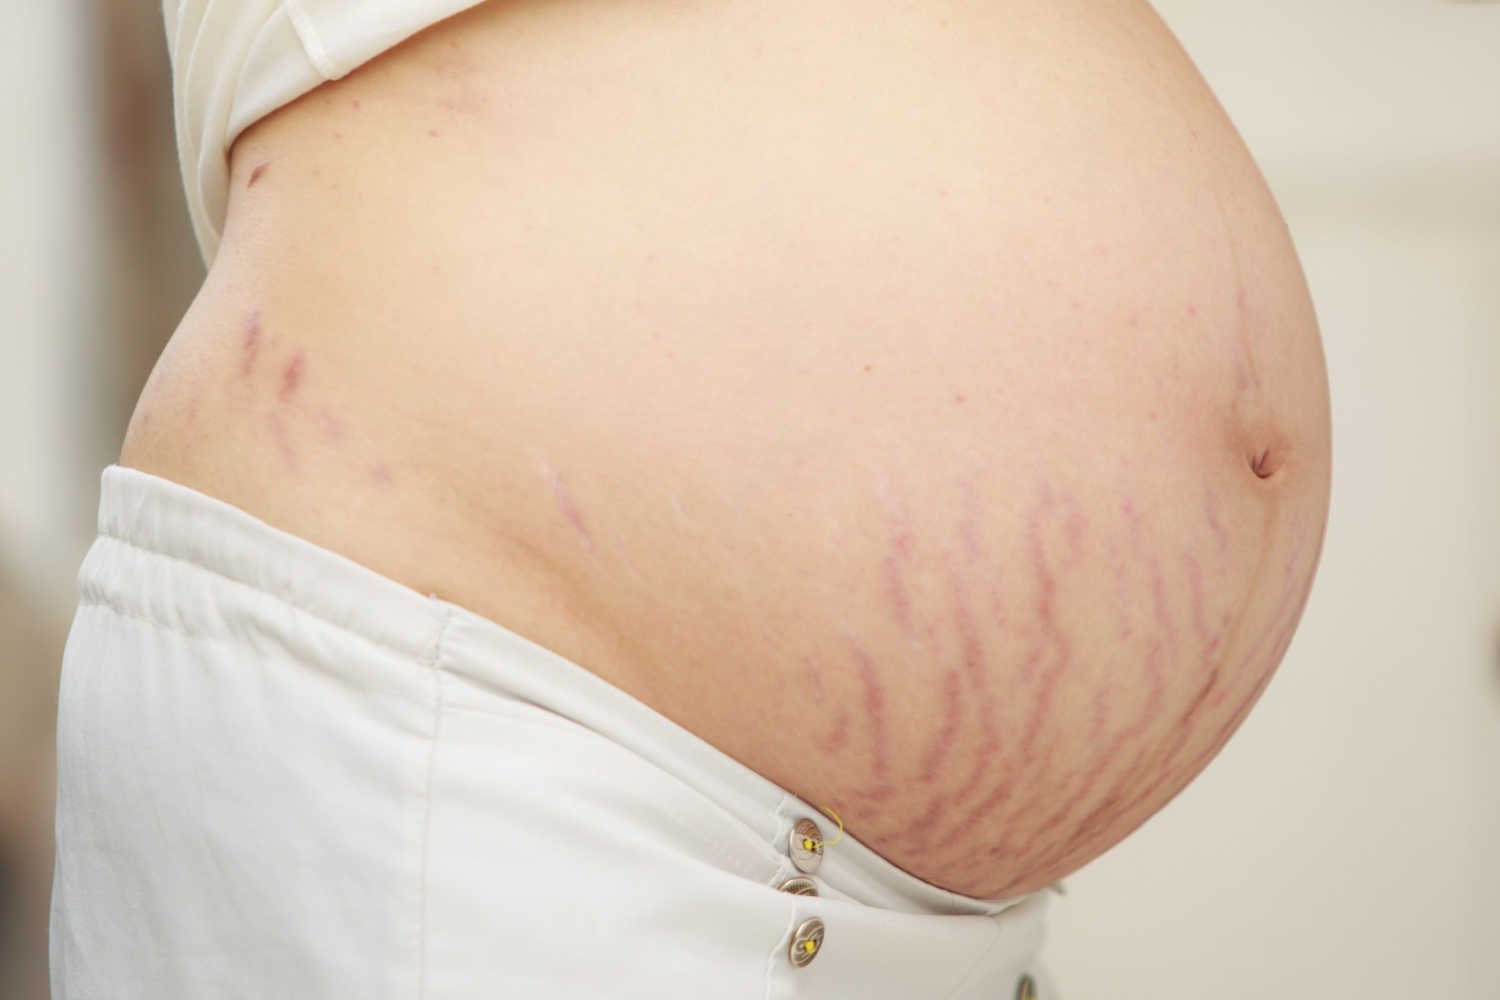 pregnant woman with stretch marks on her baby bump